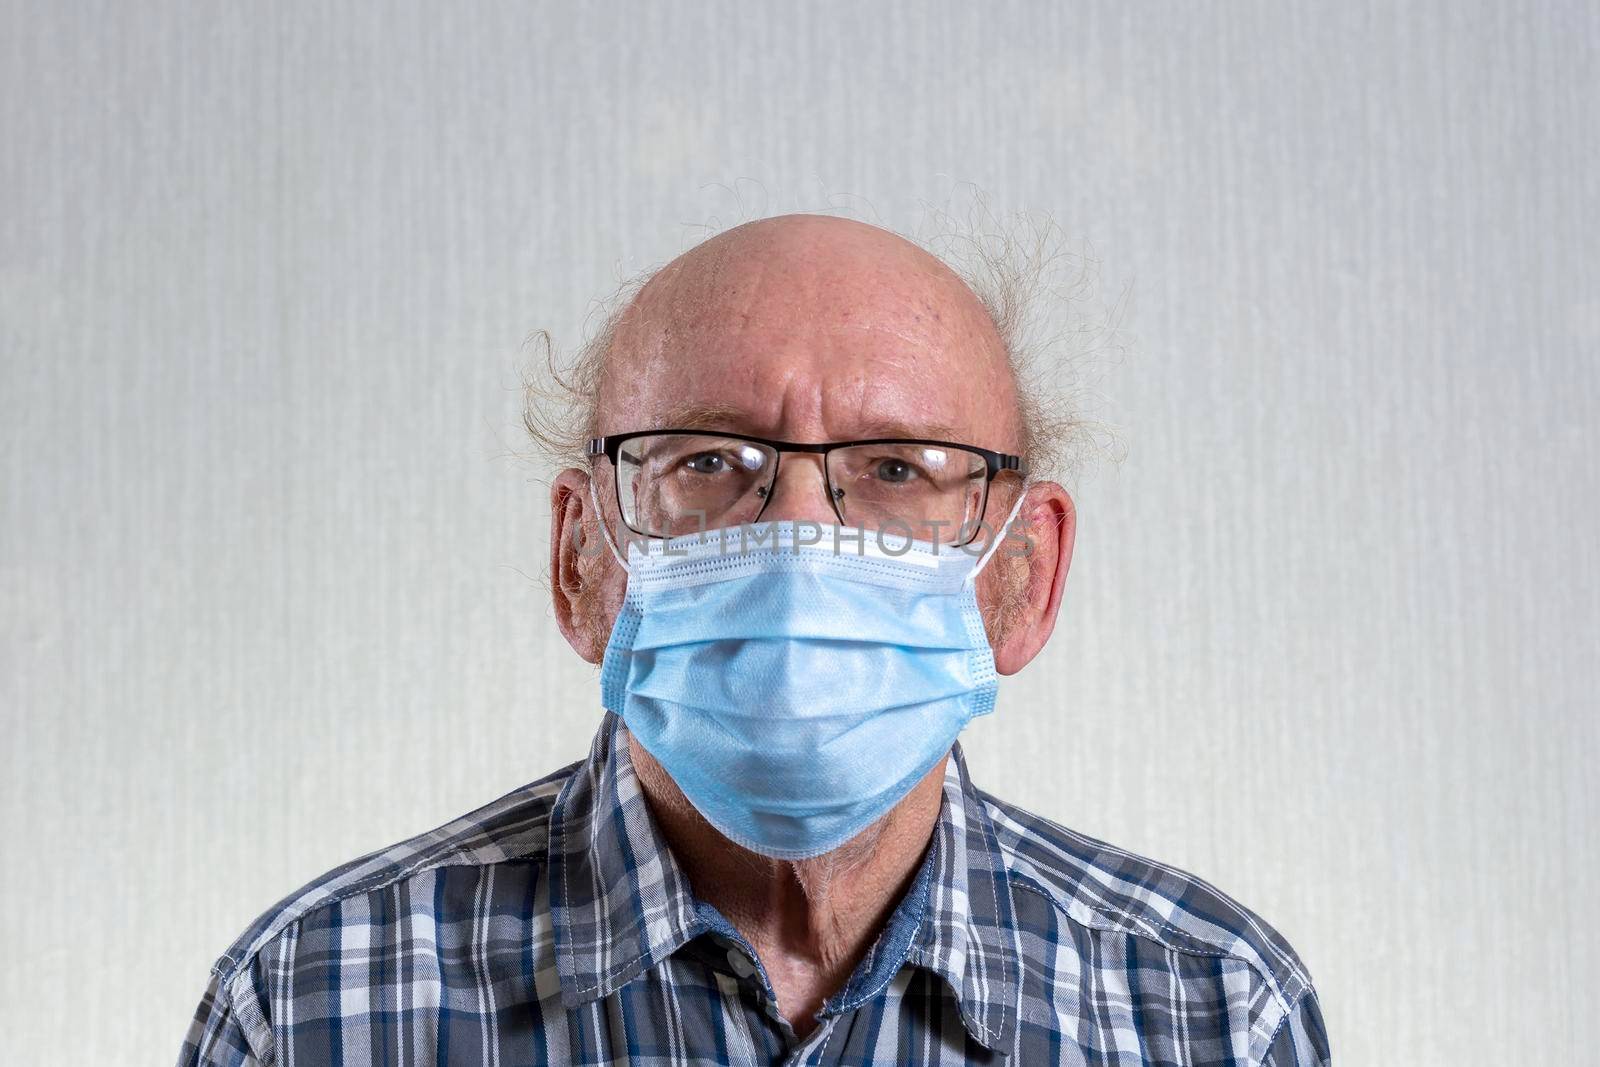 Old bald man with glasses in mask. Indoors in daylight. Front view. by Essffes